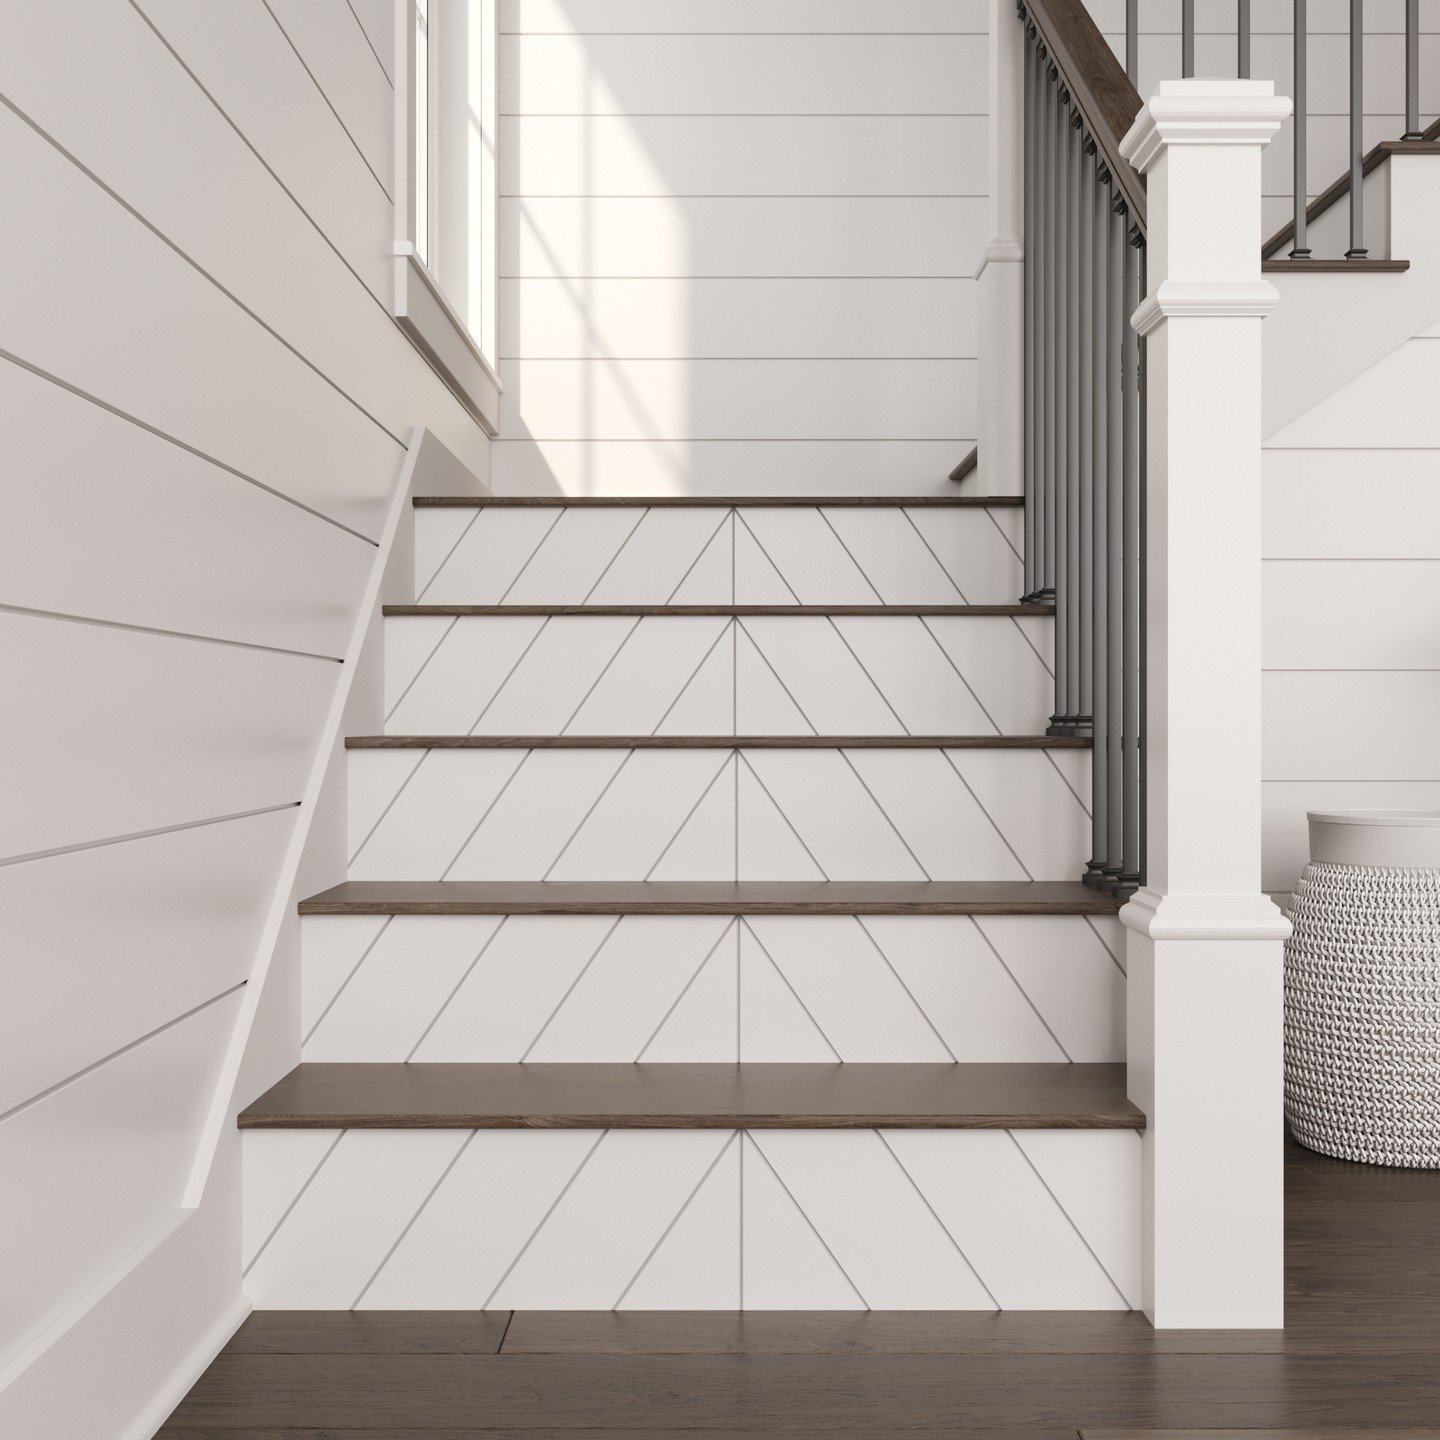 Decorative stair risers are a great way to create a clean look, and also add small details to elevate your staircase.
-
#OrnamentalBuild #LoveTheRoom #InteriorDesign #StairRisers#DecorativeMoulding #HomeDecor #Moulding